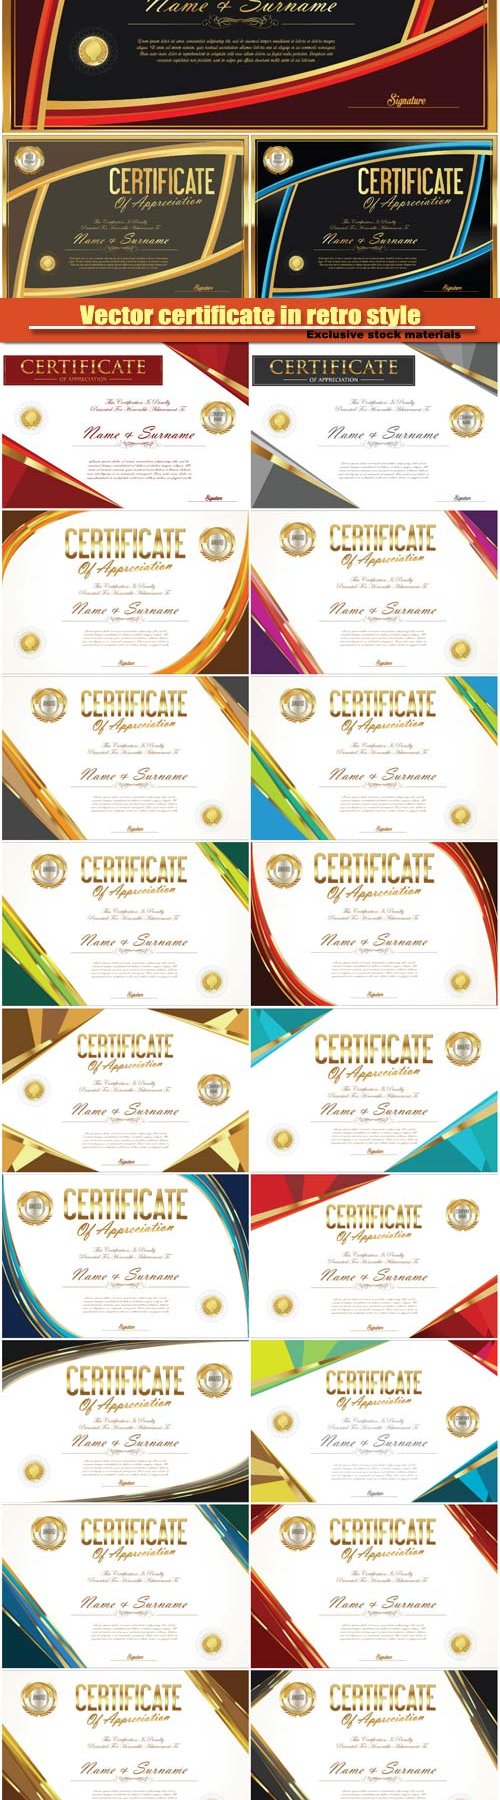   Vector certificate with a gold design in retro style #4